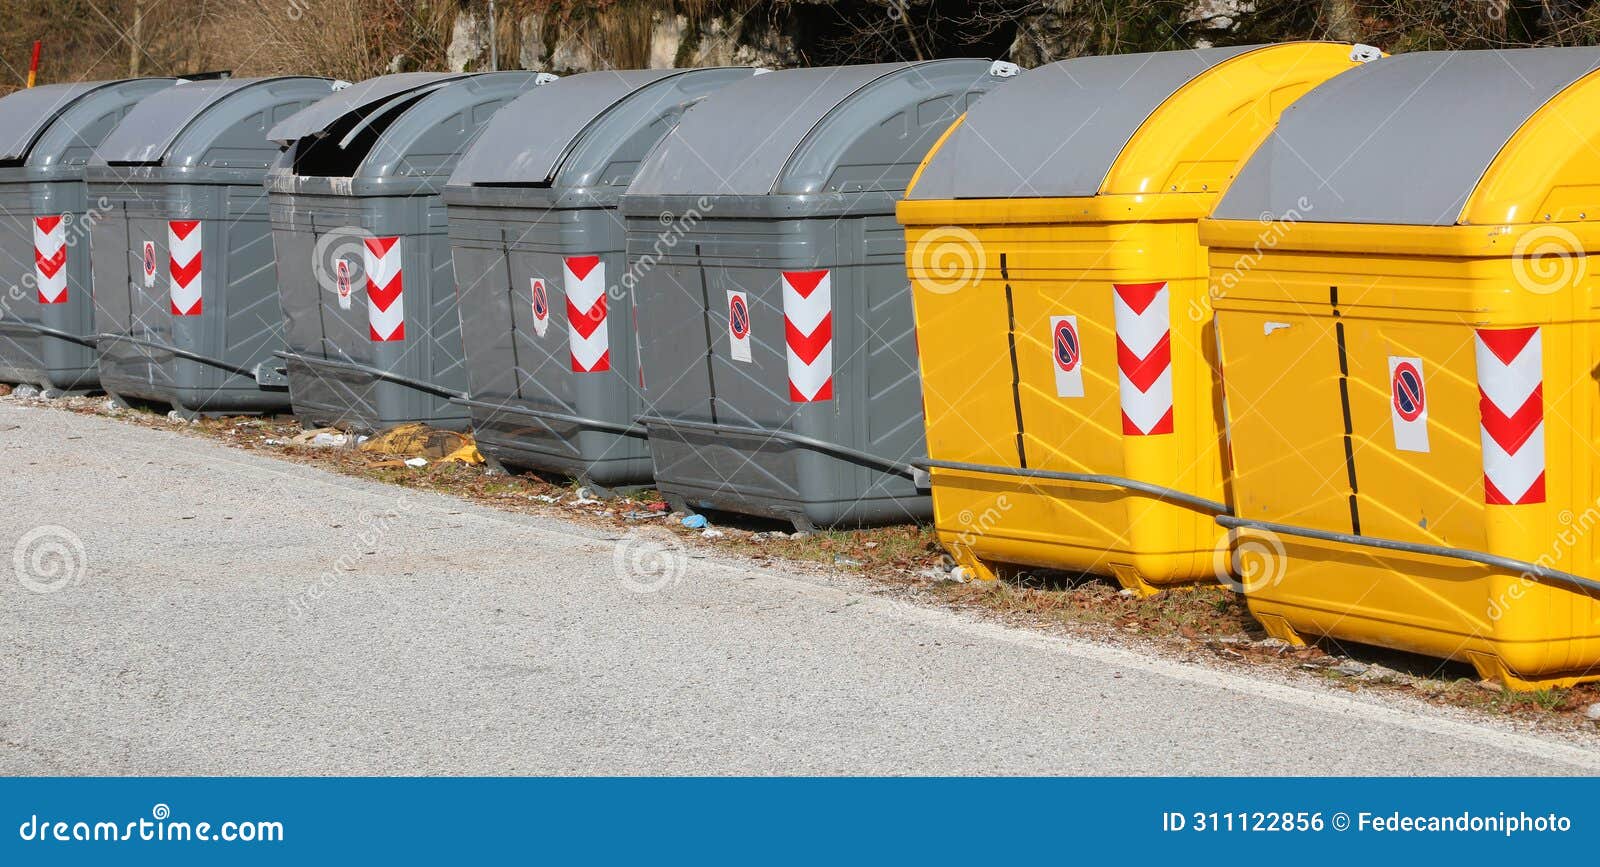 many bins for separate waste collection in the ecological area for the management material